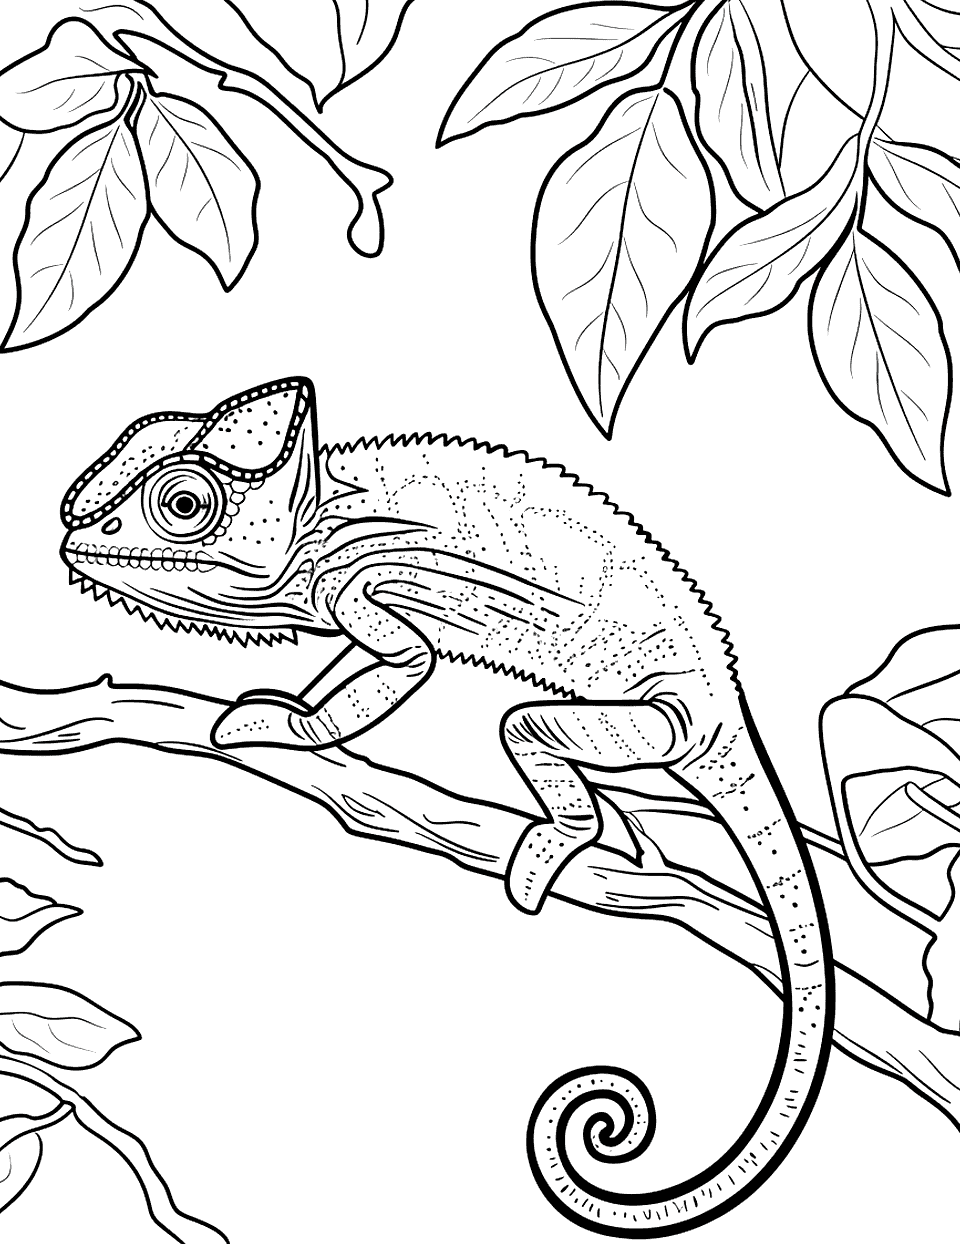 Chameleon Changing Colors Lizard Coloring Page - A chameleon on a simple branch, ready to shift its colors to blend with the green leaves.